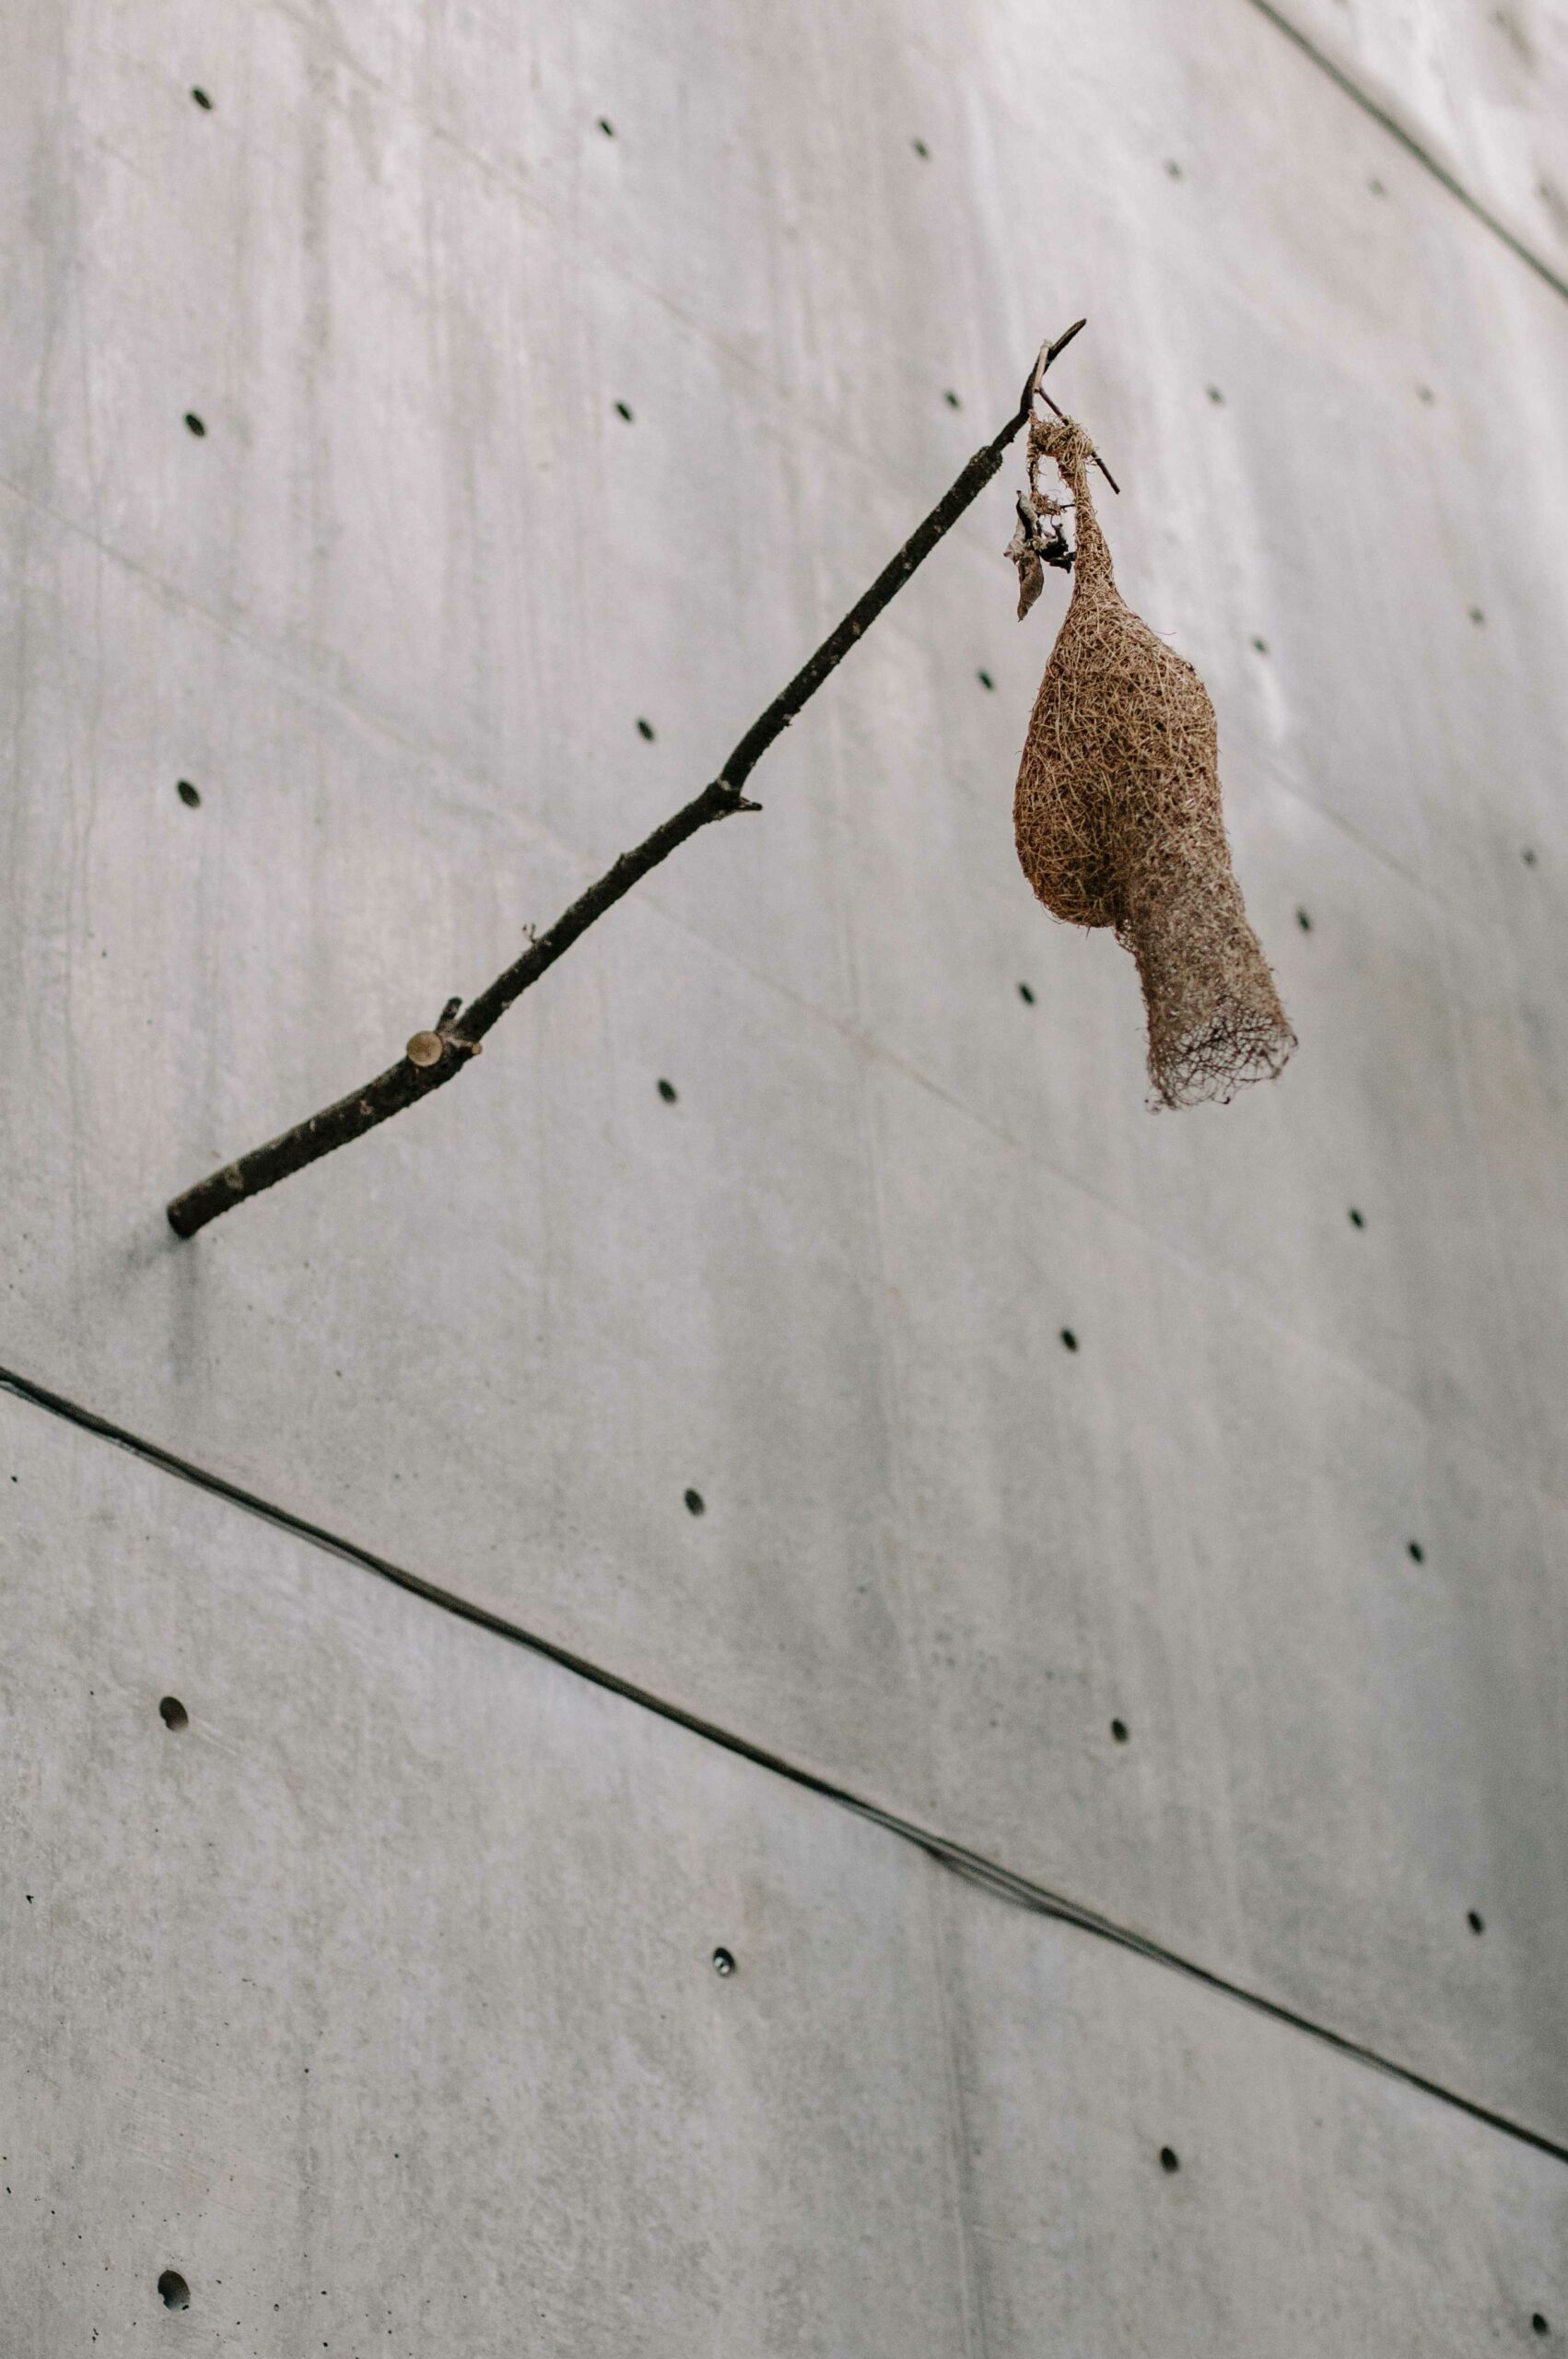 A weaver bird nest mounted on the gallery's concrete walls, adding natural elements to the exhibition.